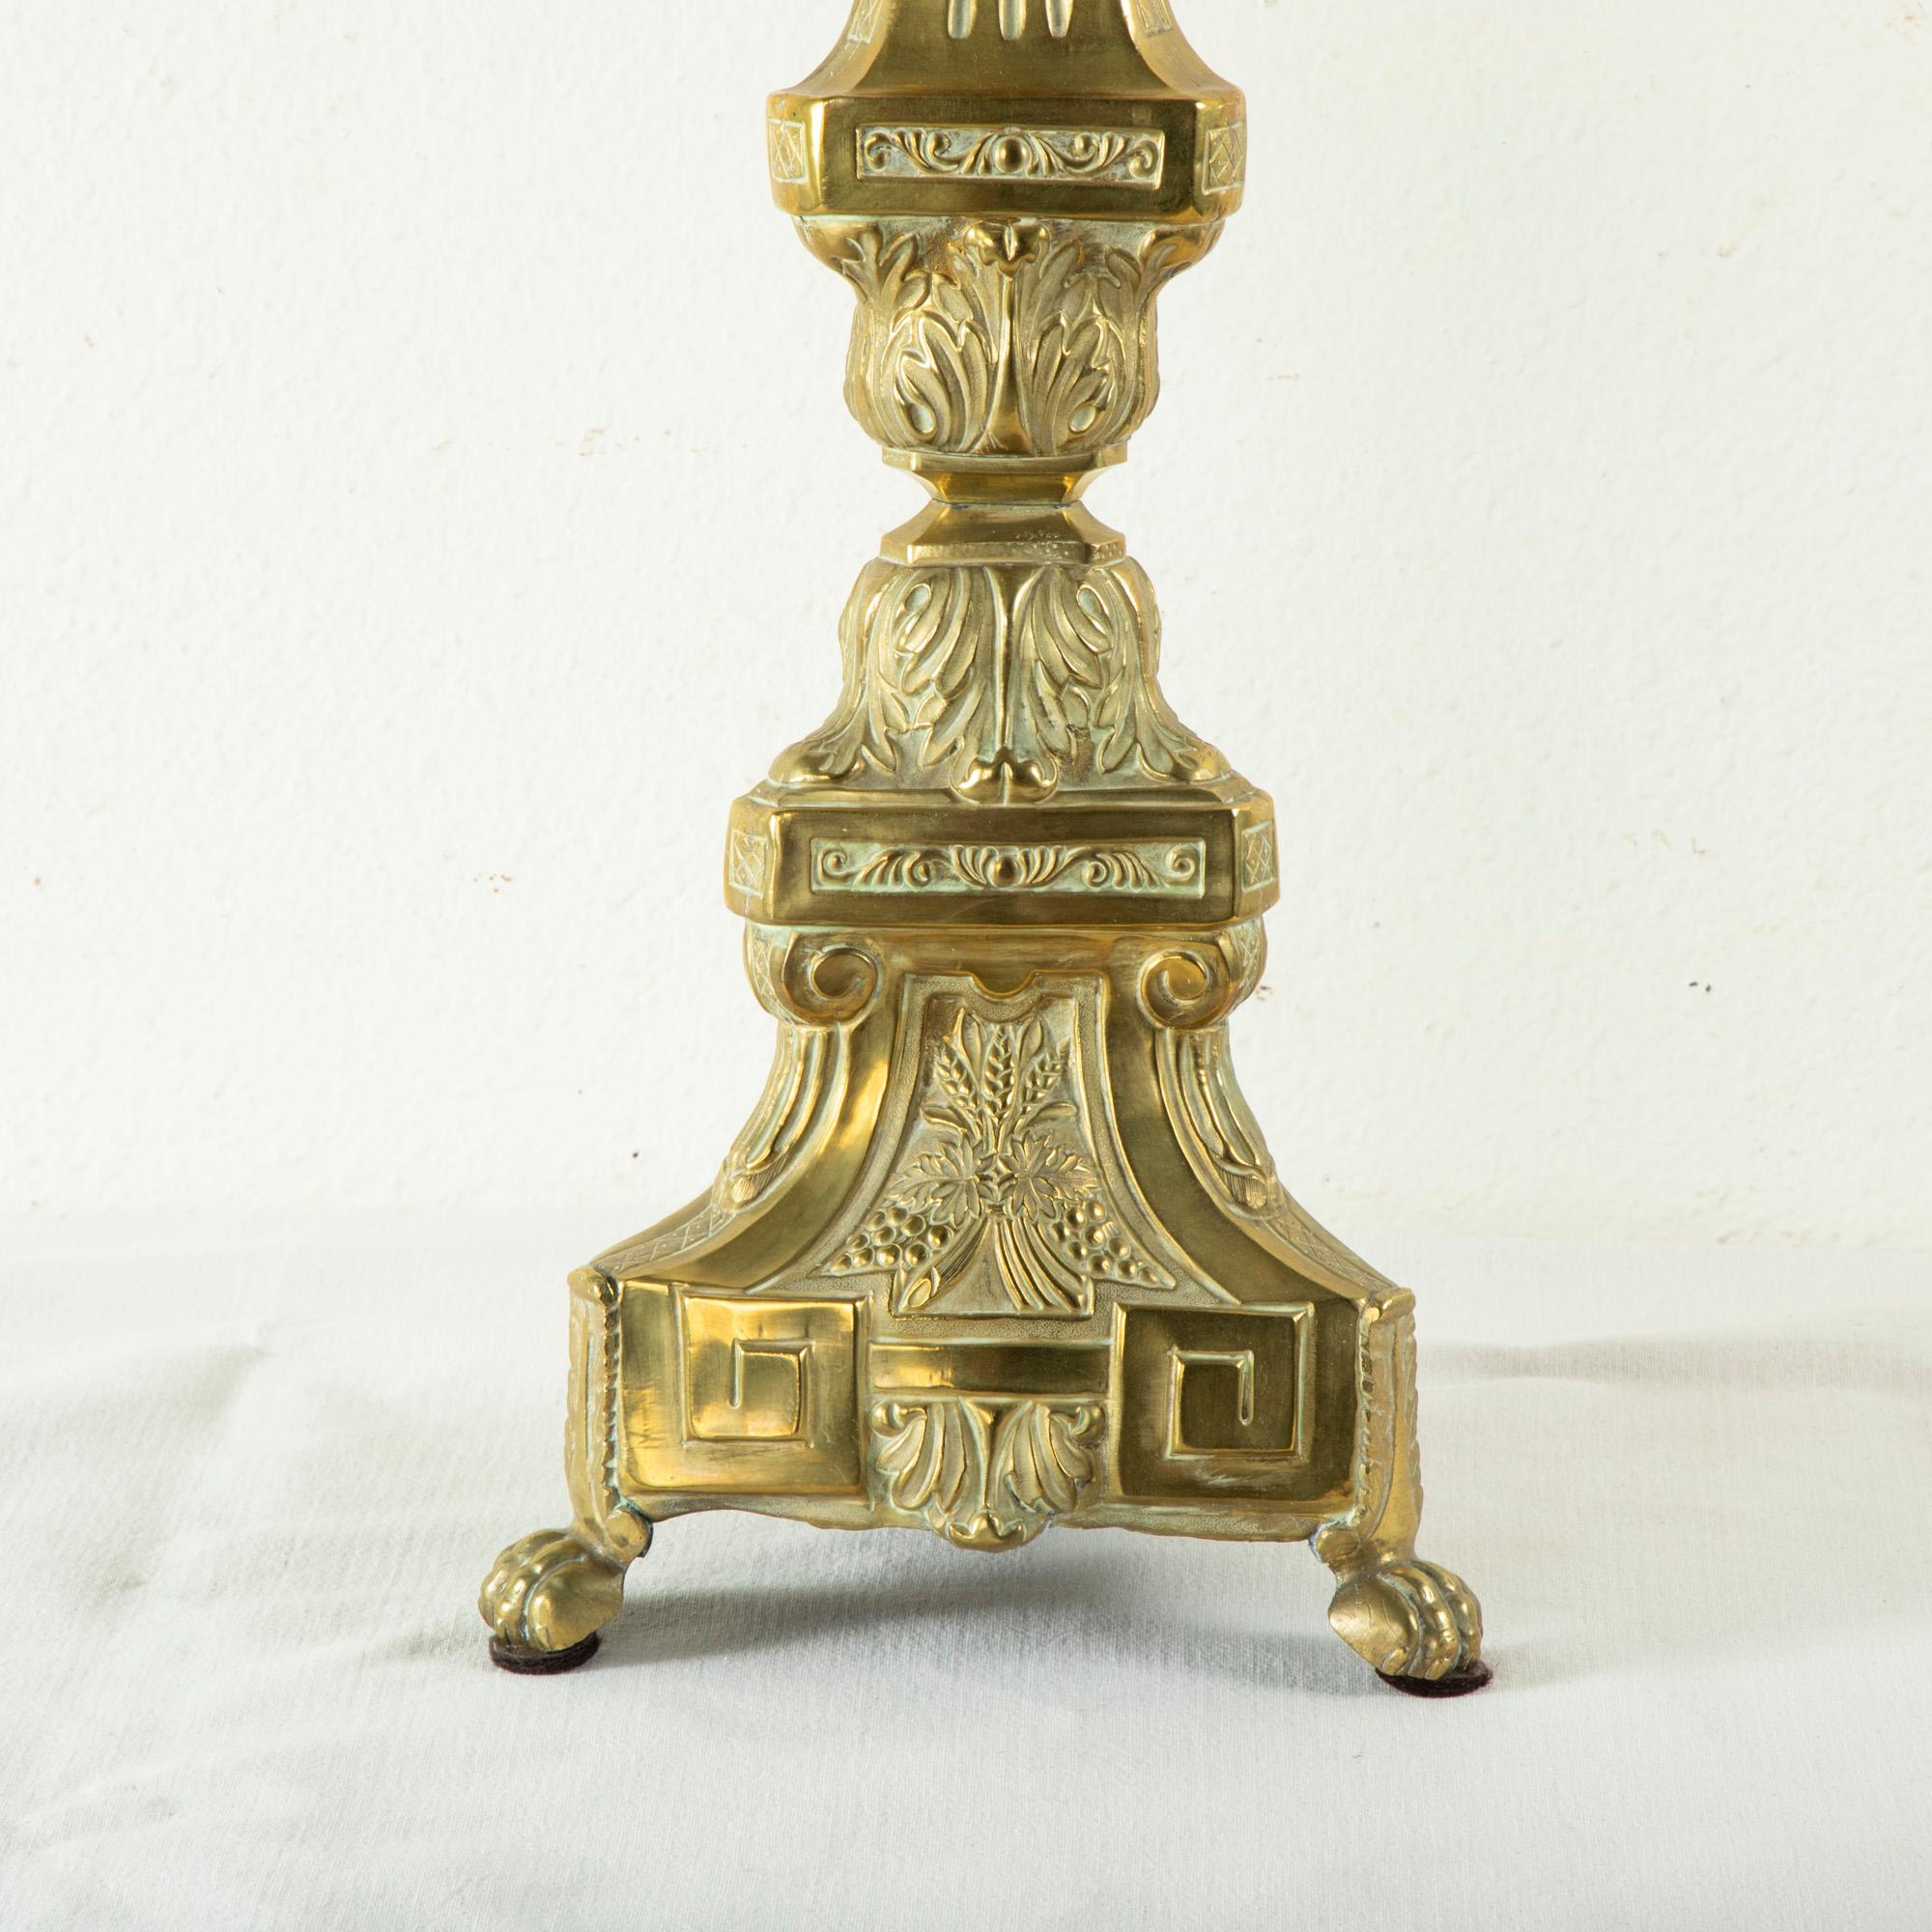 Tall Late 19th Century Brass Repousse Church Pricket, Candlestick For Sale 1